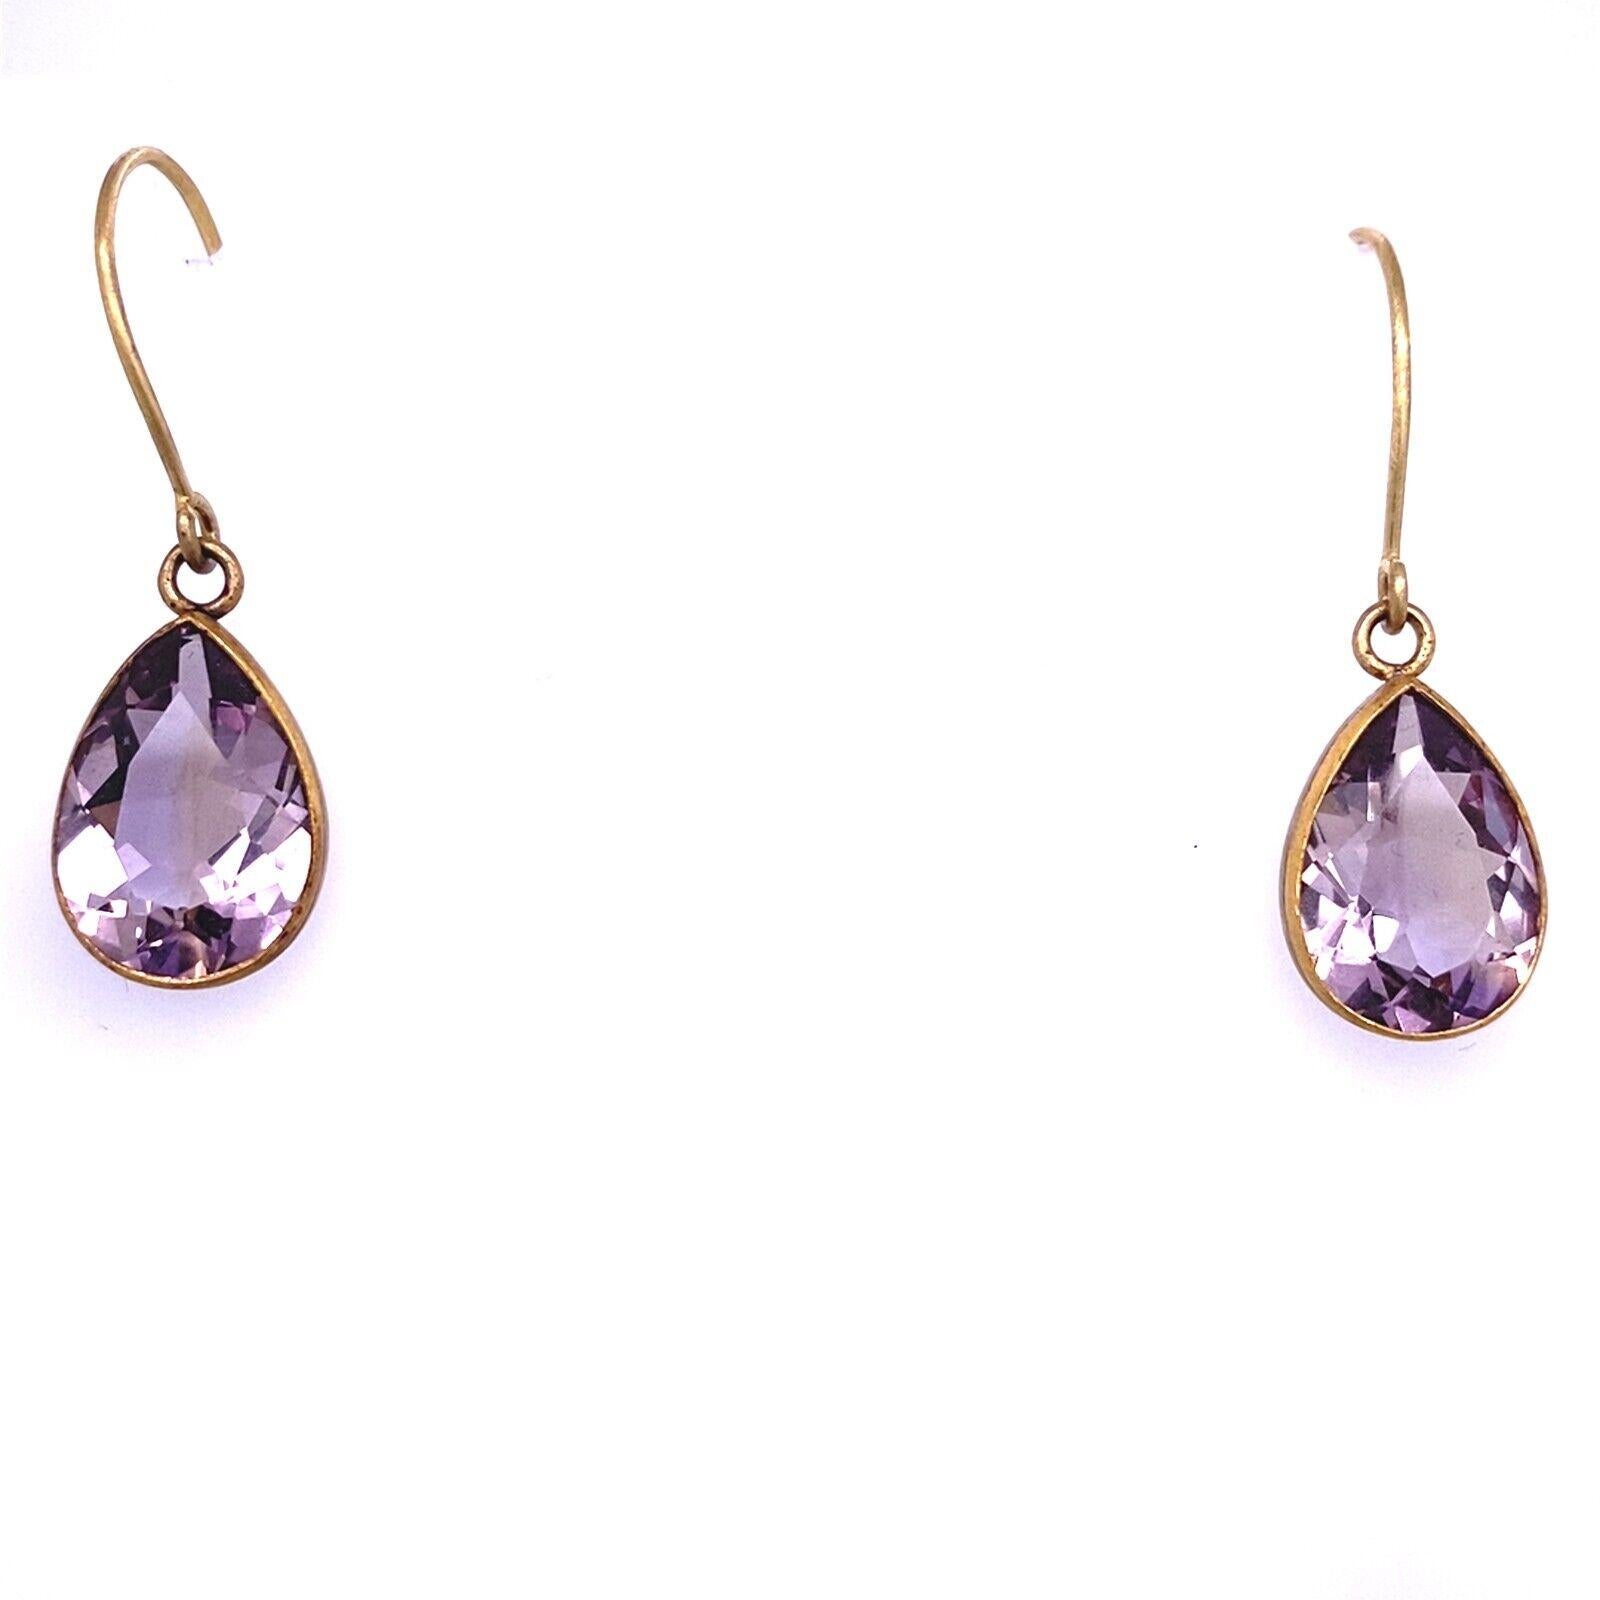 Handmade Large Amethyst Drop Earrings in 18ct Yellow Gold & Silver For Sale